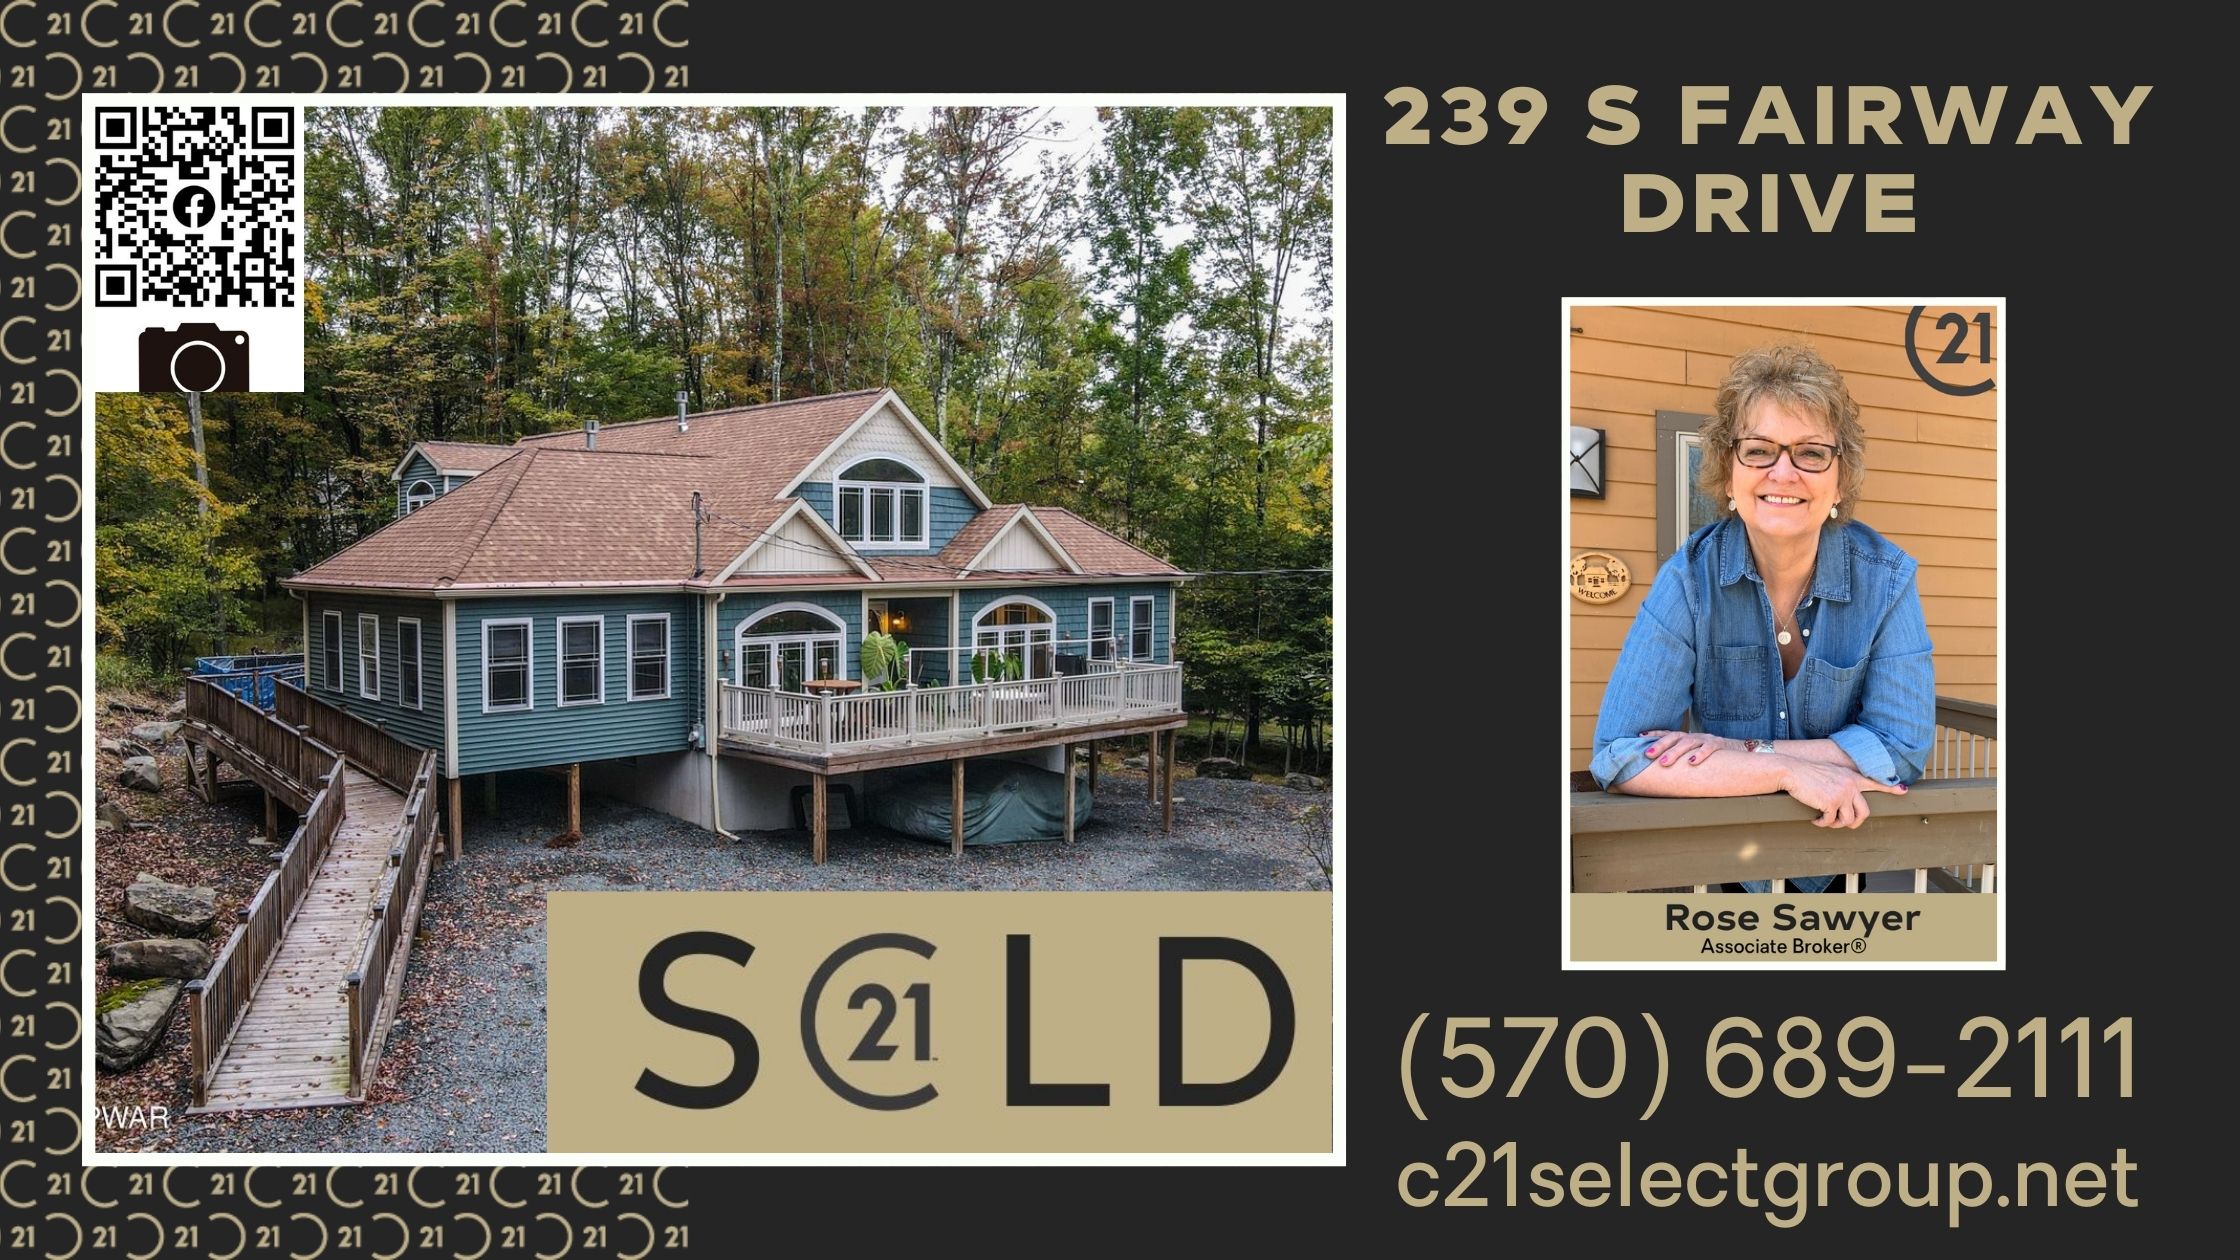 SOLD! 239 S Fairway Drive: The Hideout